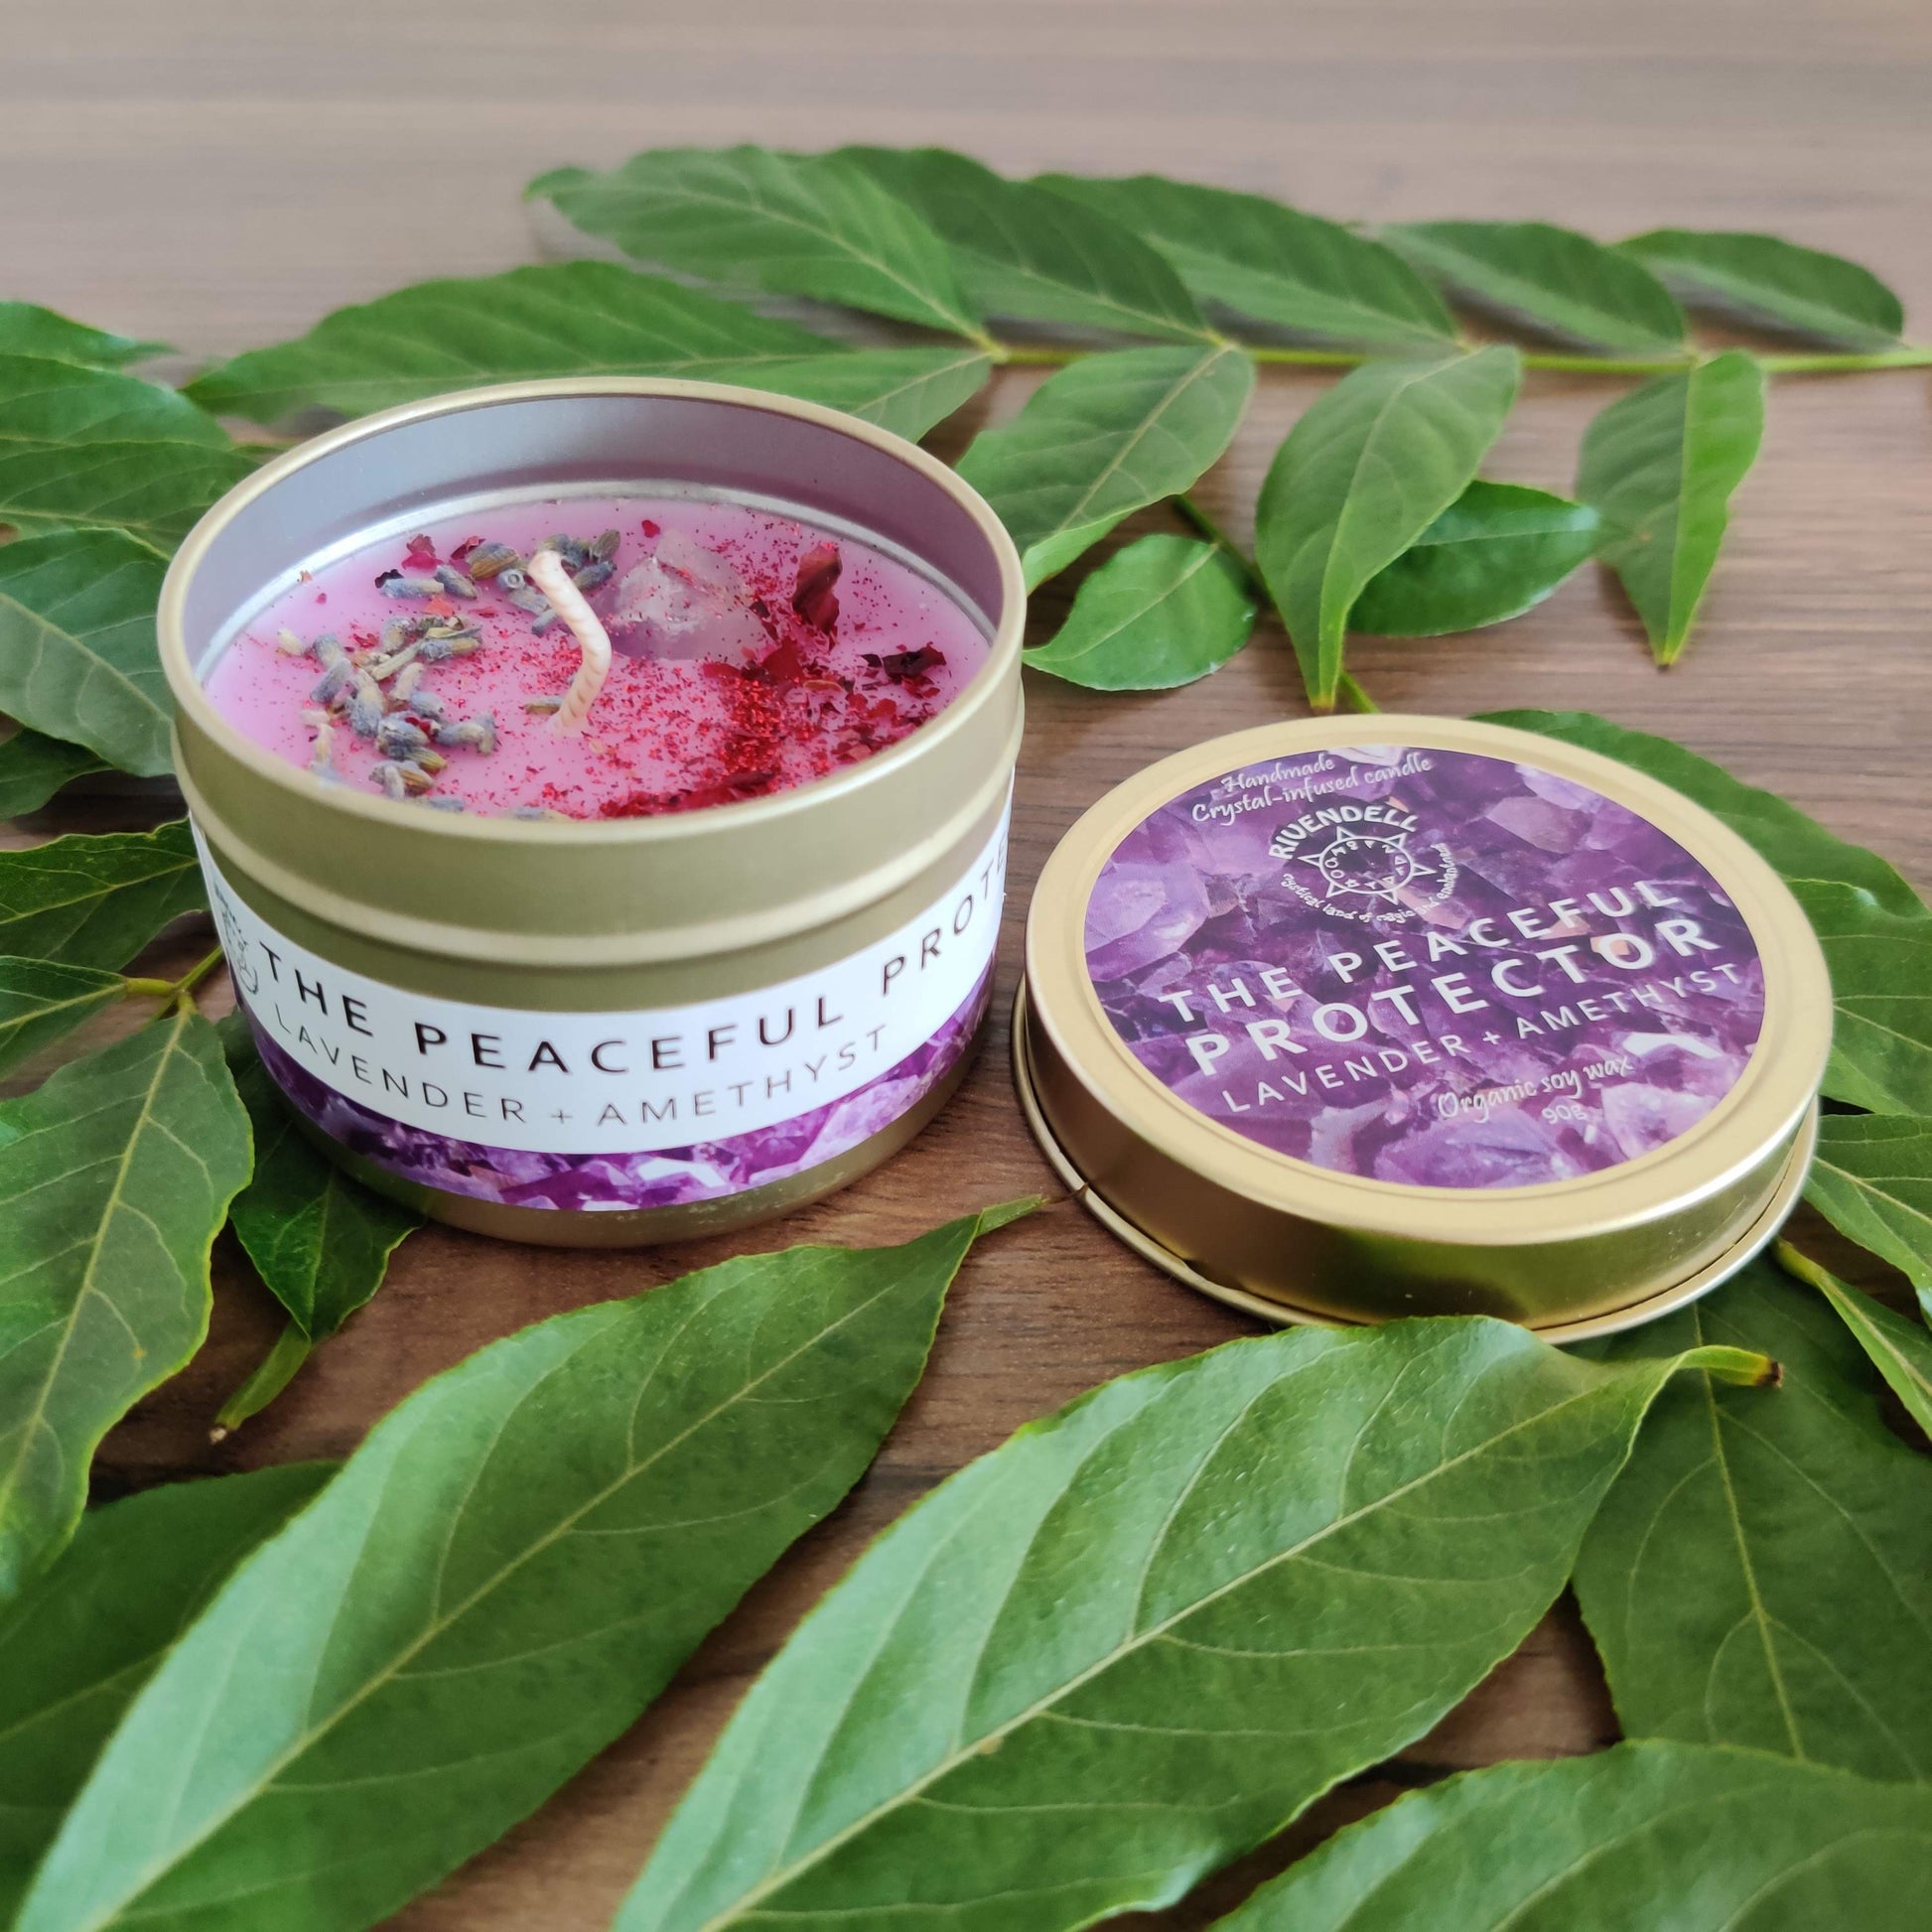 "The Peaceful Protector" Lavender + Amethyst Crystal-infused Tin Candle - Rivendell Shop